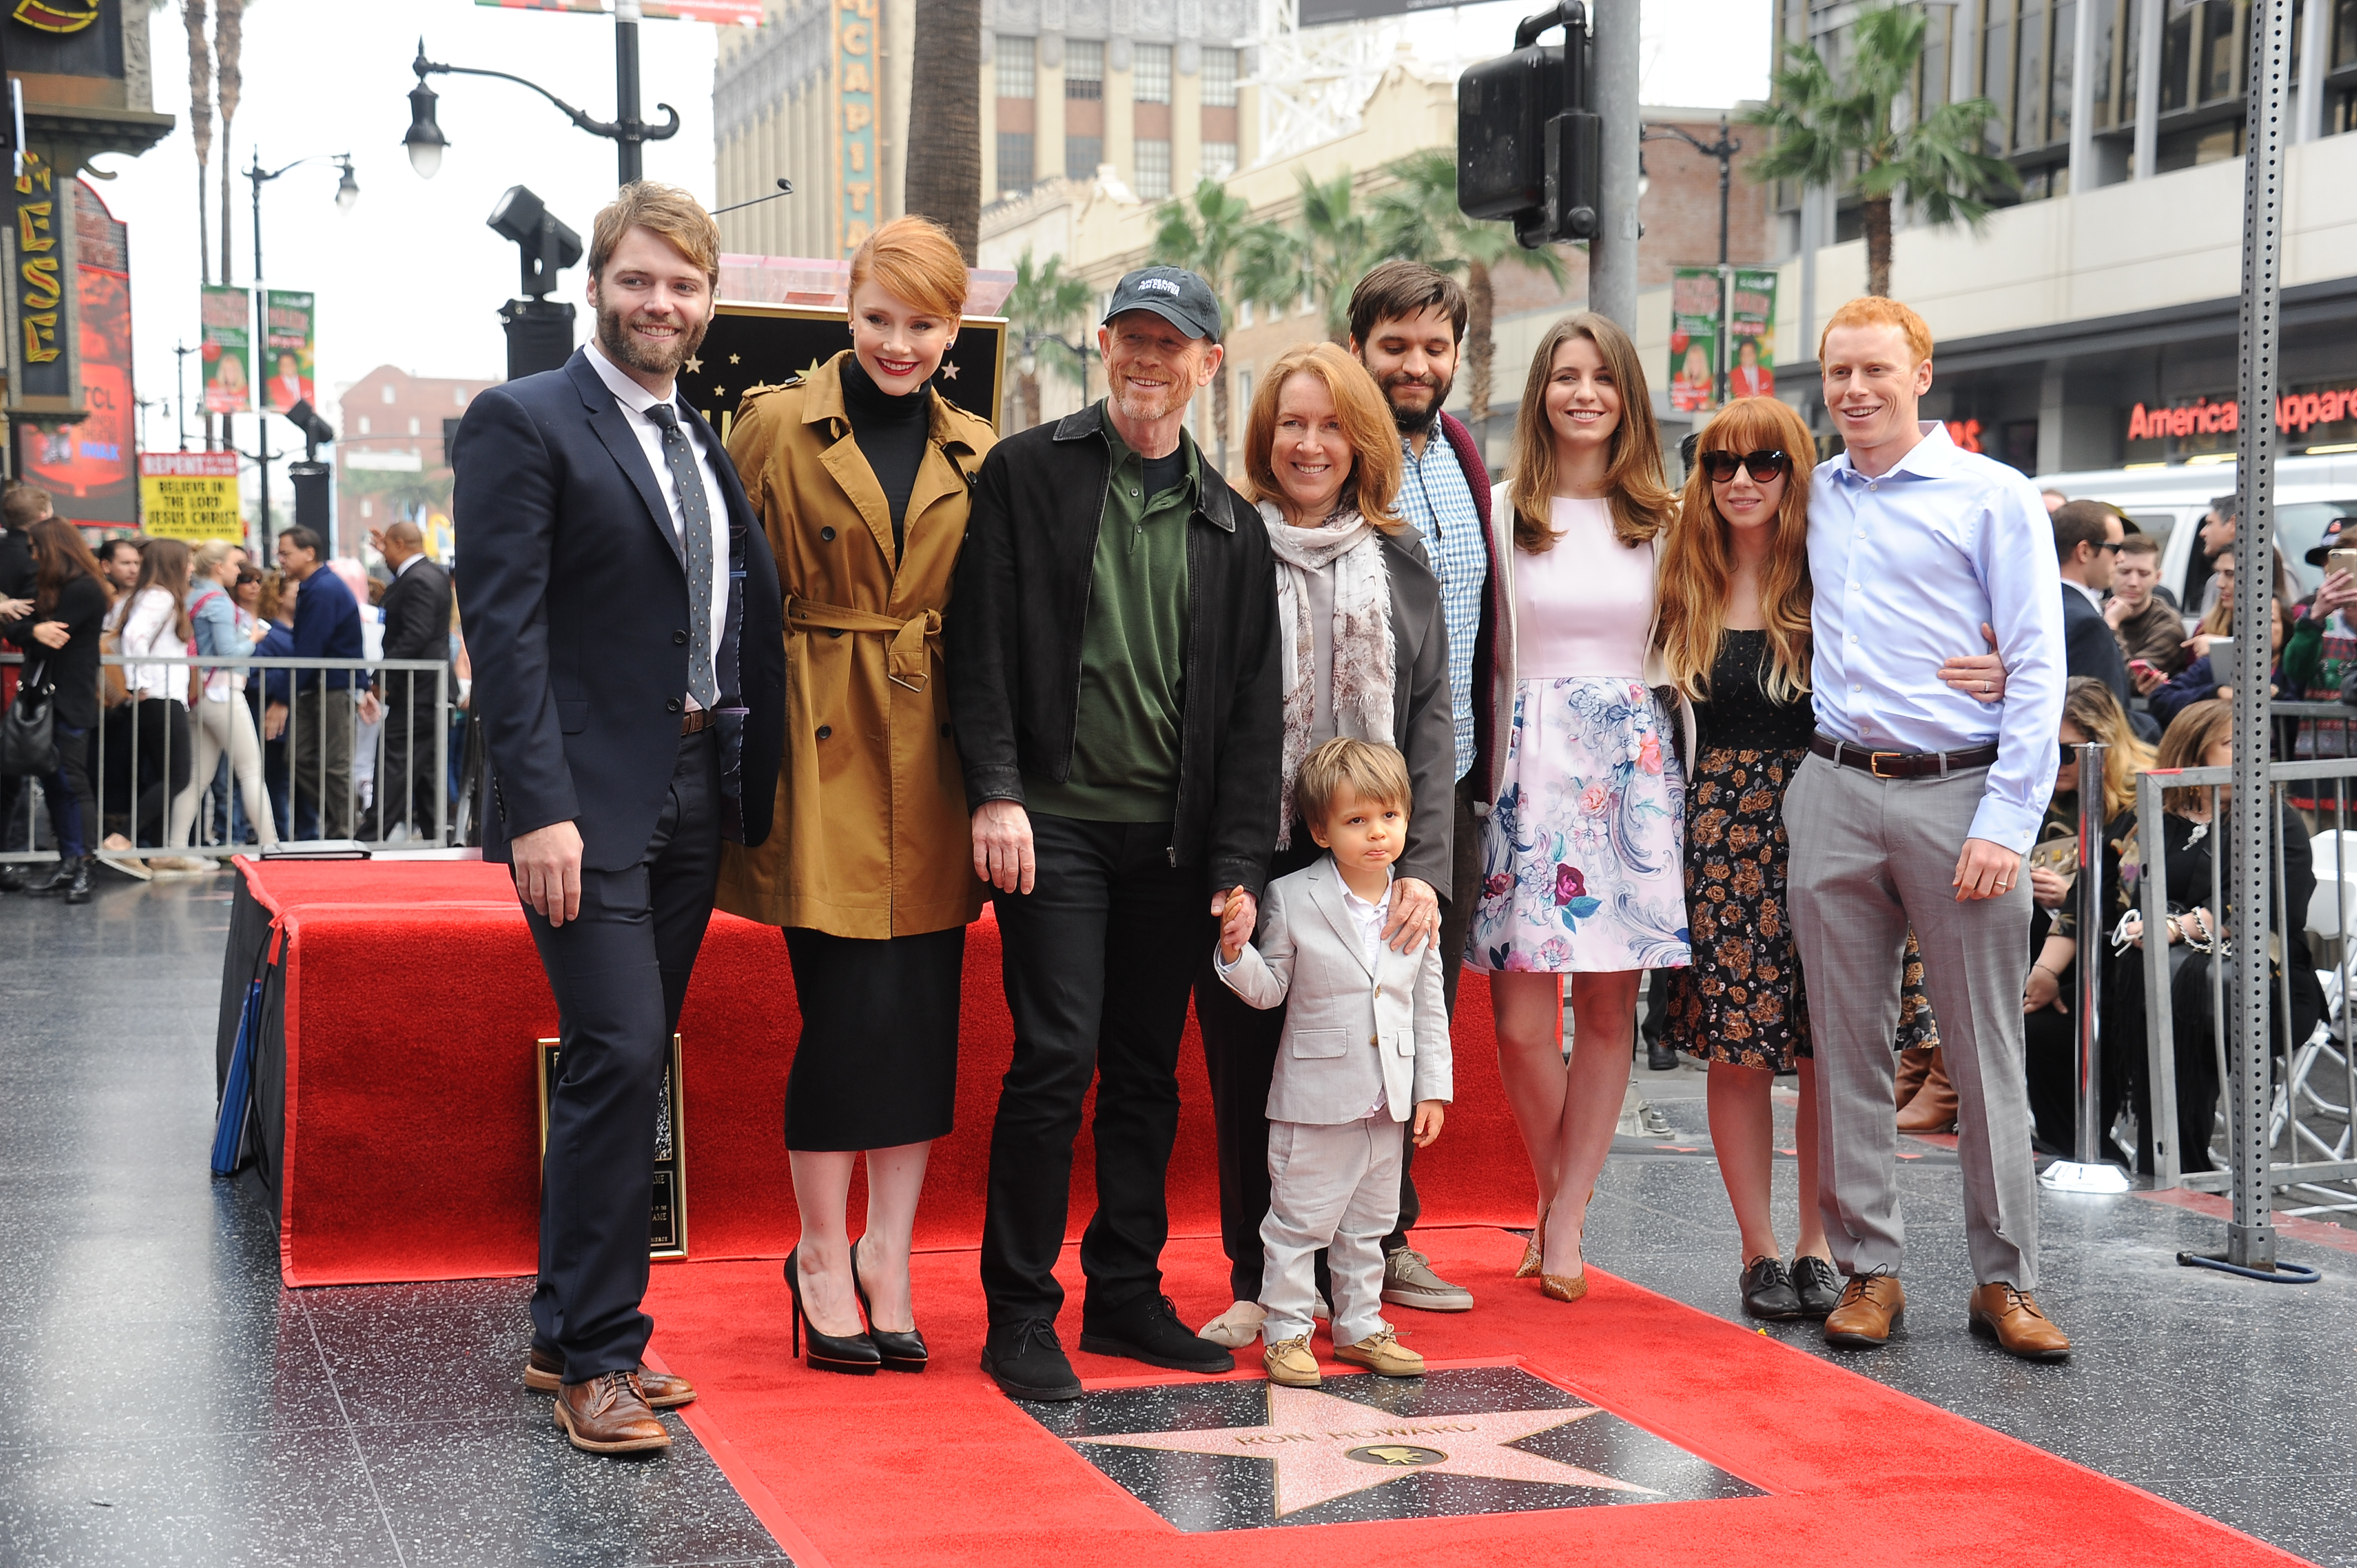 Director Ron Howard and family pose at the ceremony that honored him with a Star on the Hollywood Walk of Fame, on December 10, 2015. | Source: Getty Images